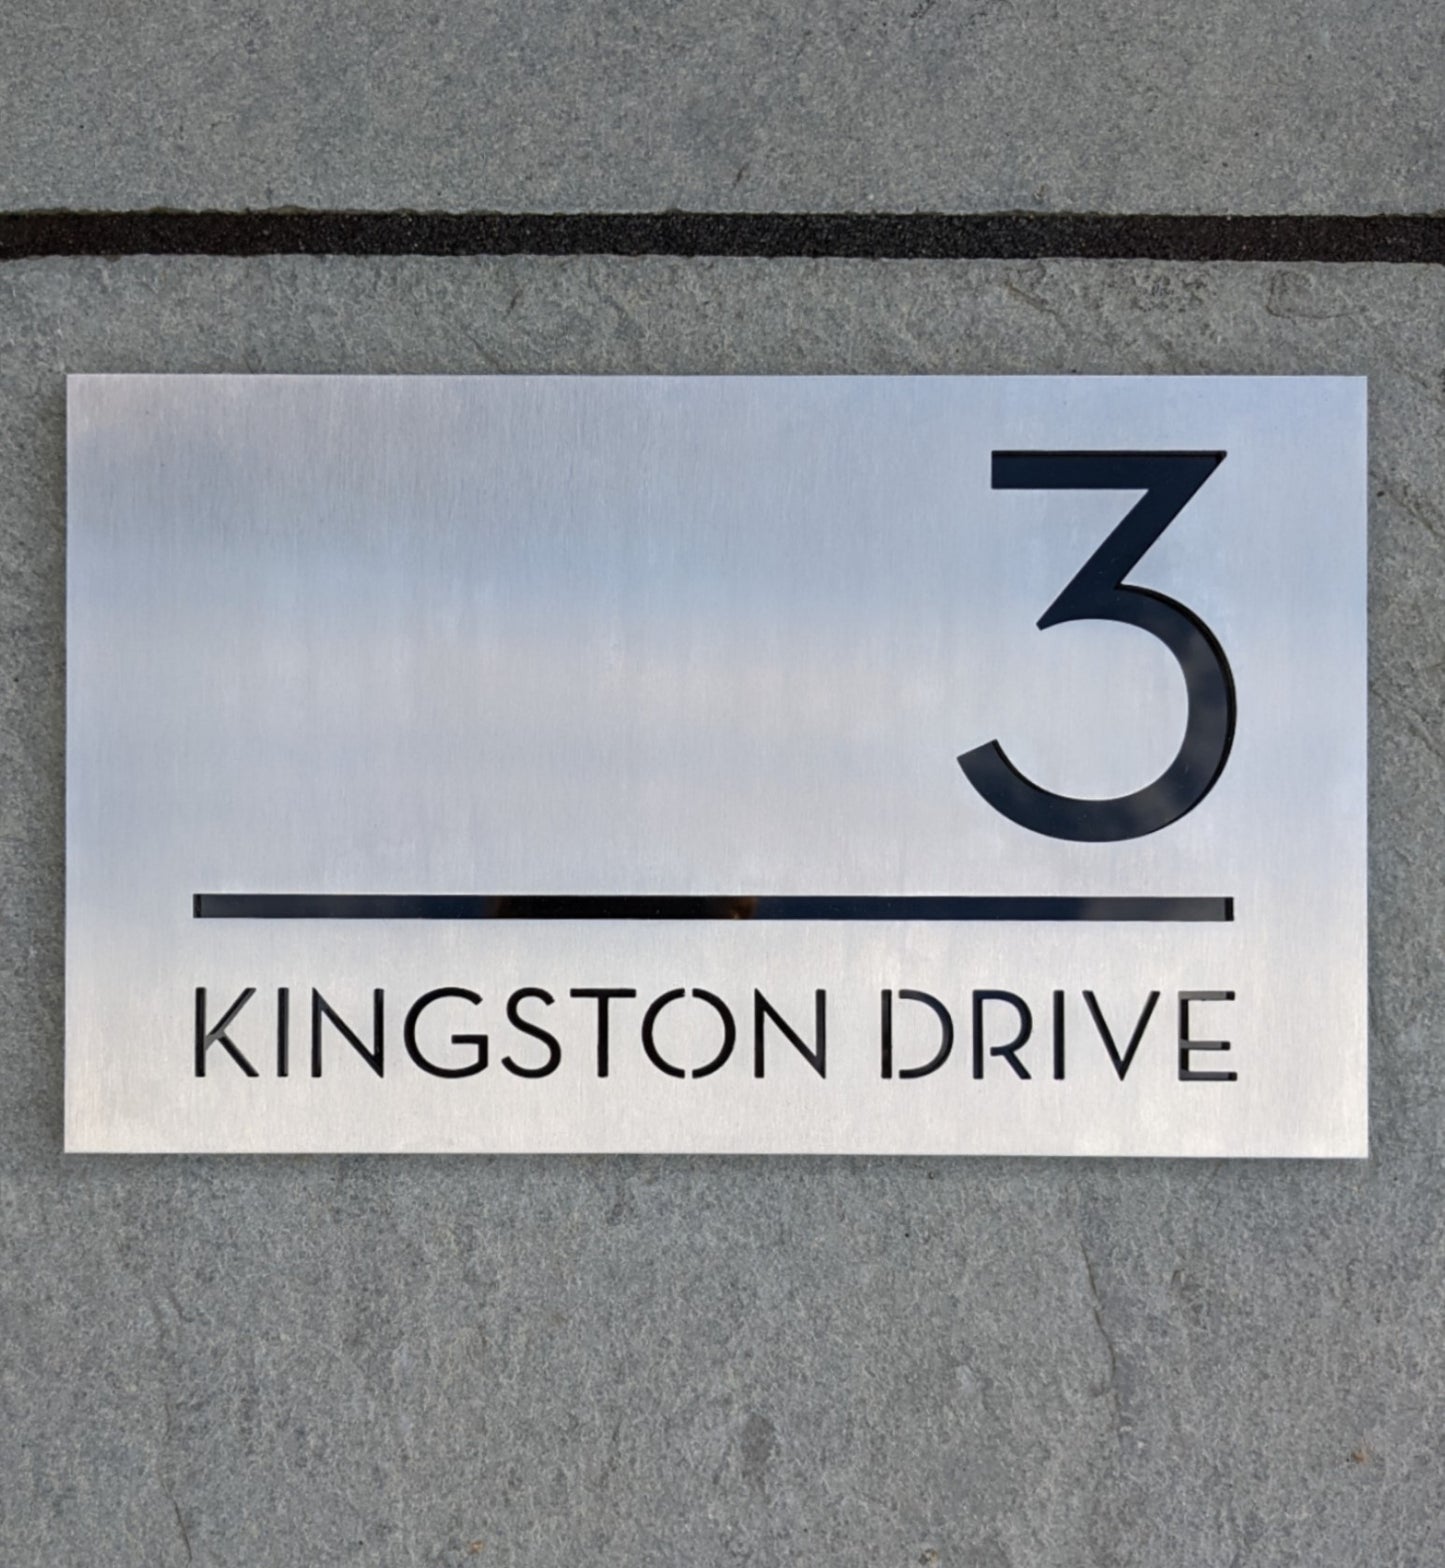 Modern House Sign, Modern House Number Plaque, Modern address sign, modern address plaque, modern sign, contemporary house number, contemporary house sign, modern house number, house sigm, address sign, stainless steel house sign, stainless steel house number and road name sign